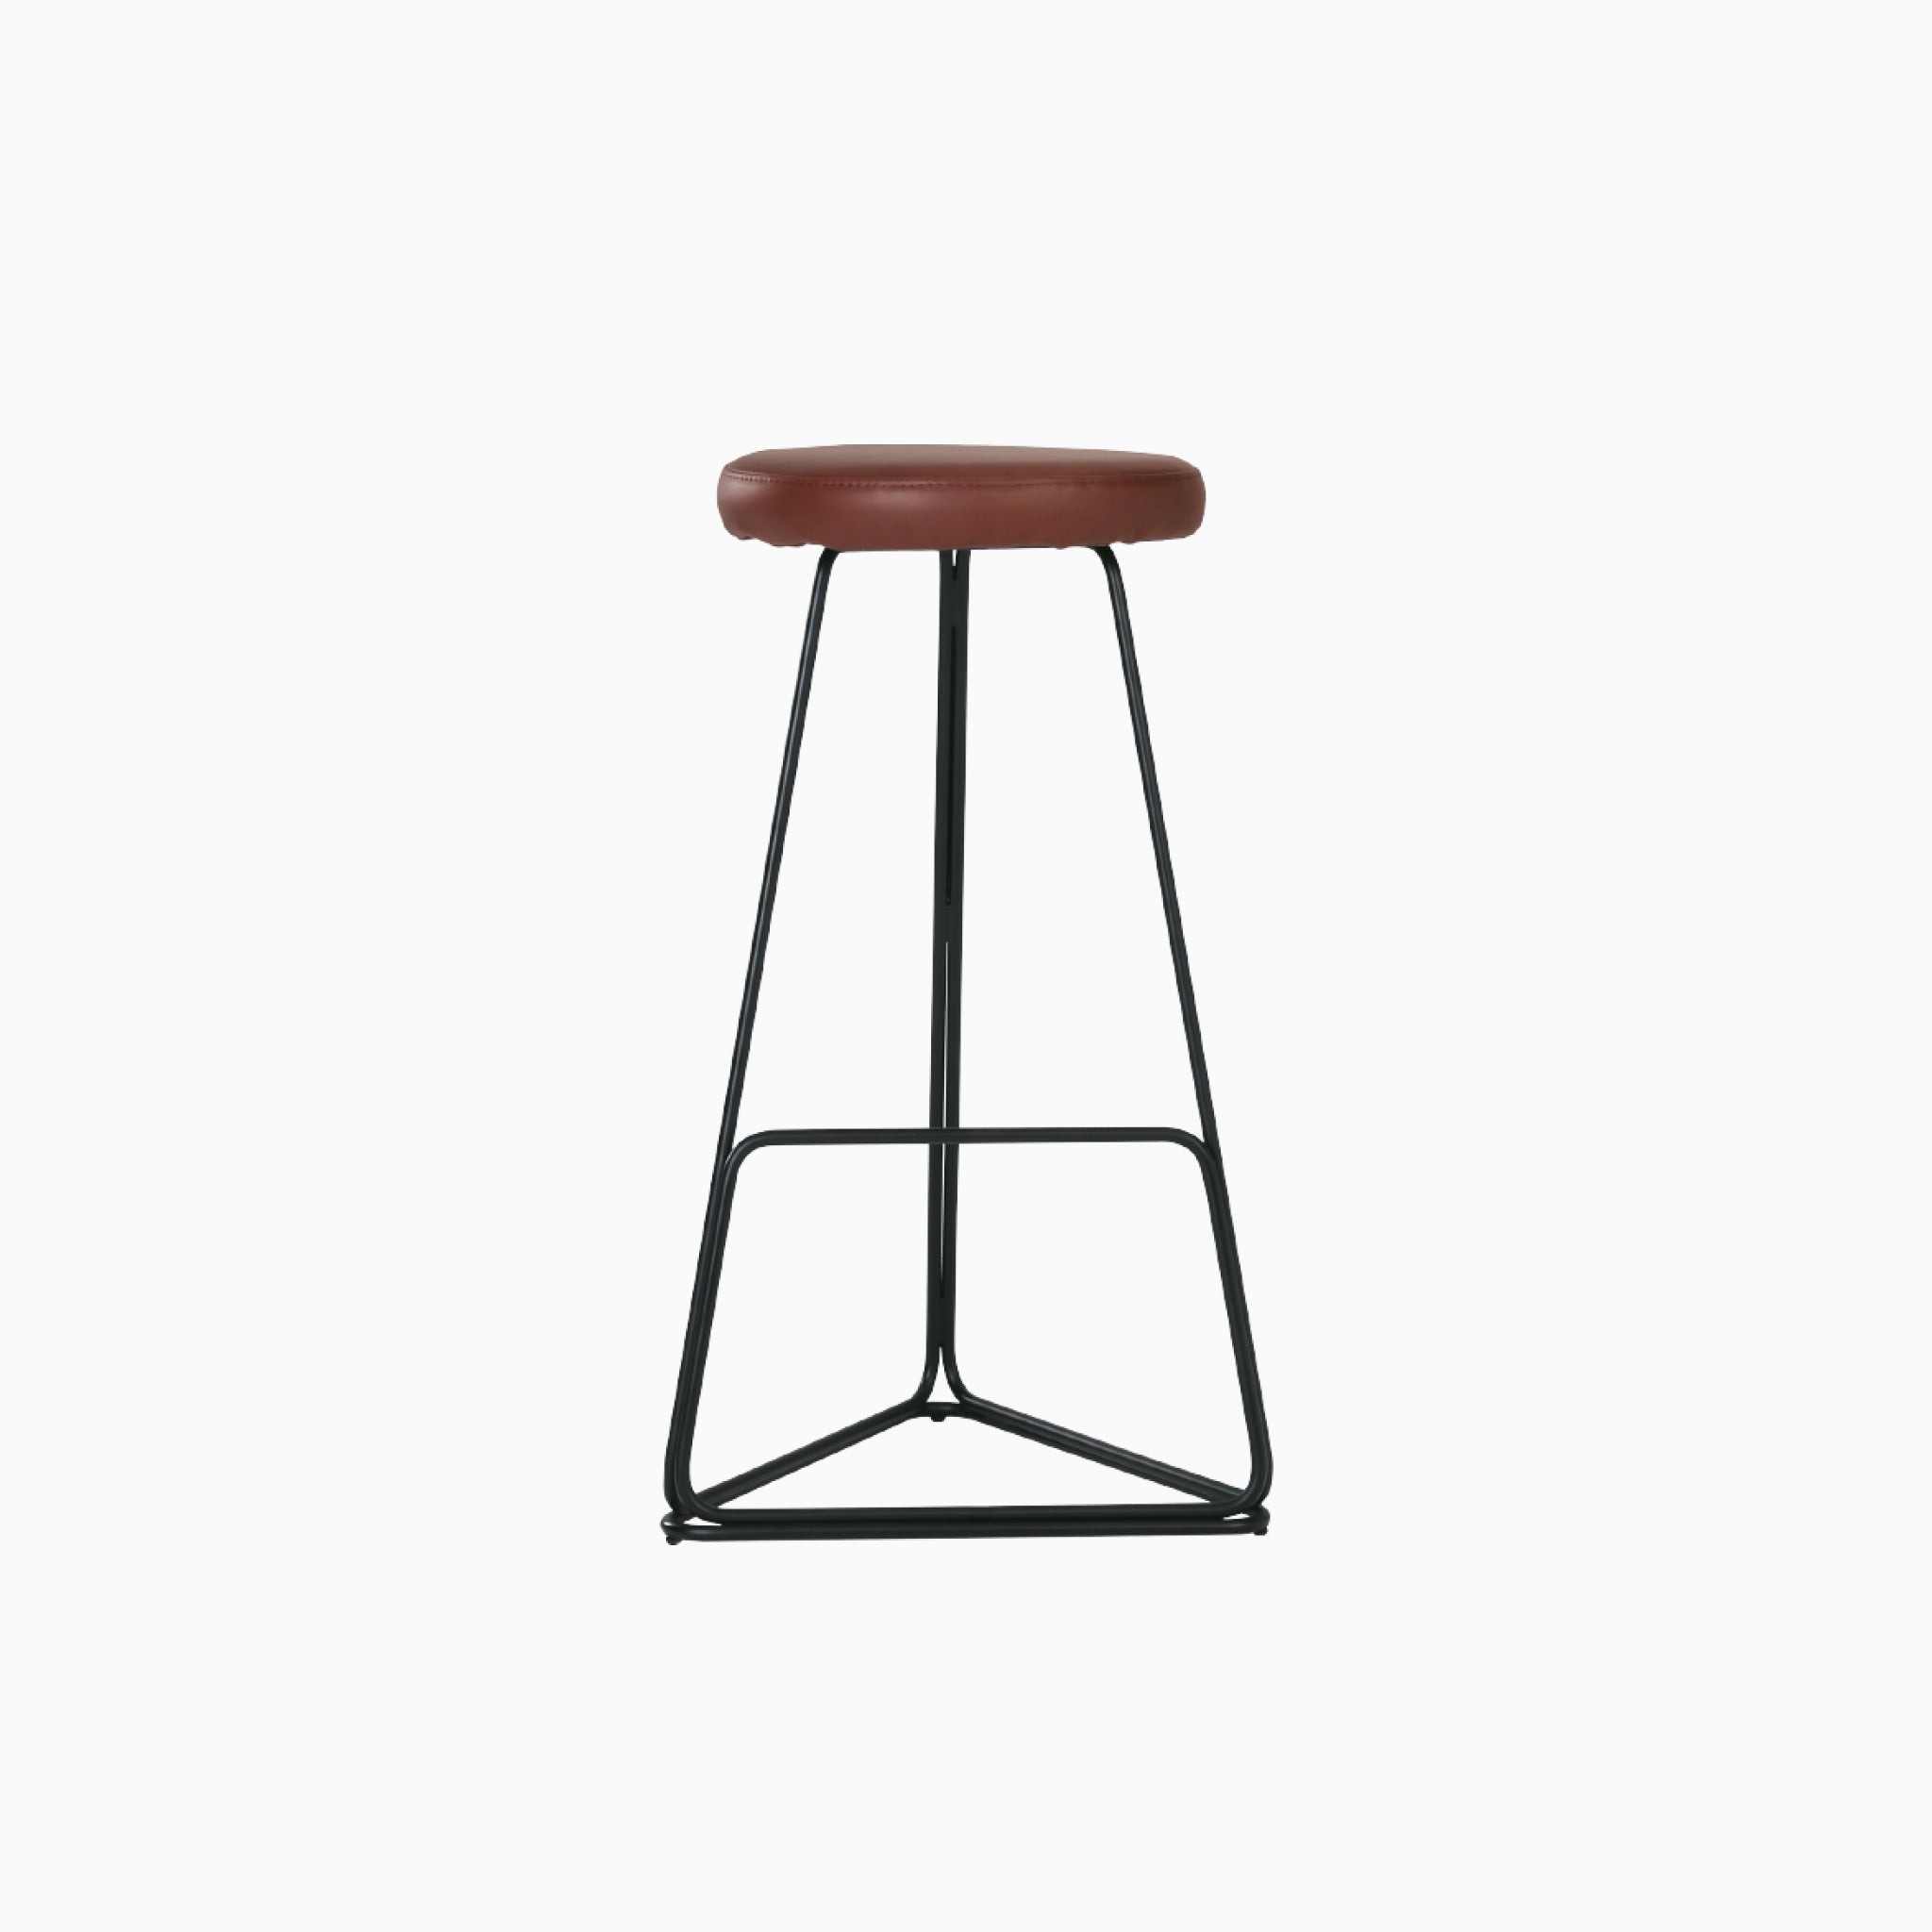 Nord Brown Aniline Leather Bar Stools